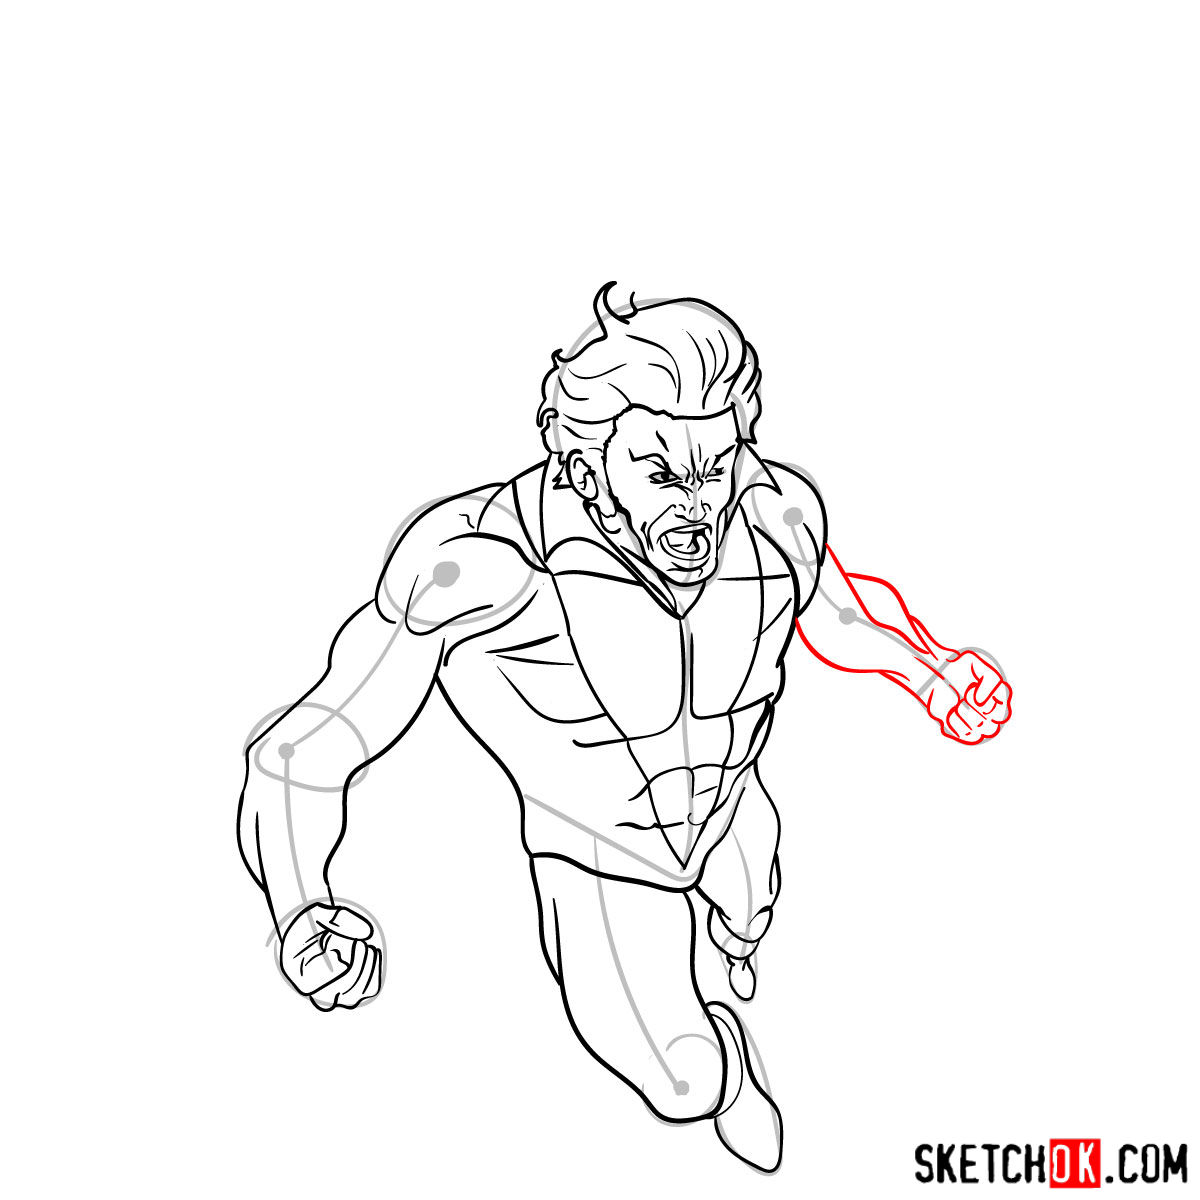 How to draw Banshee mutant from X-Men - step 12